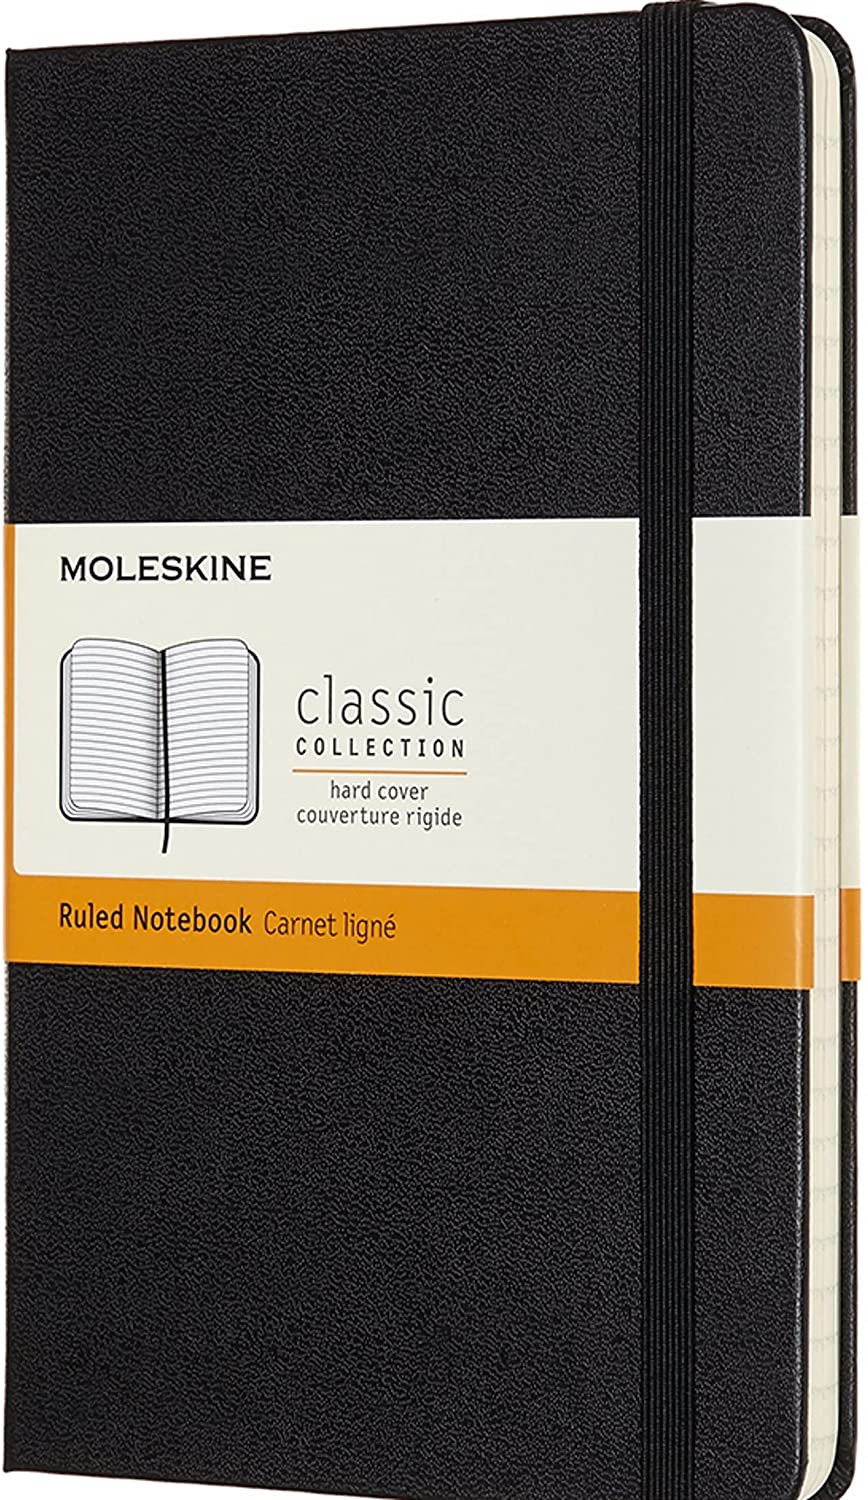 Moleskine Classic Notebook, Hard Cover, Medium (4.5&quot; x 7&quot;) Ruled/Lined, Black, 208 Pages